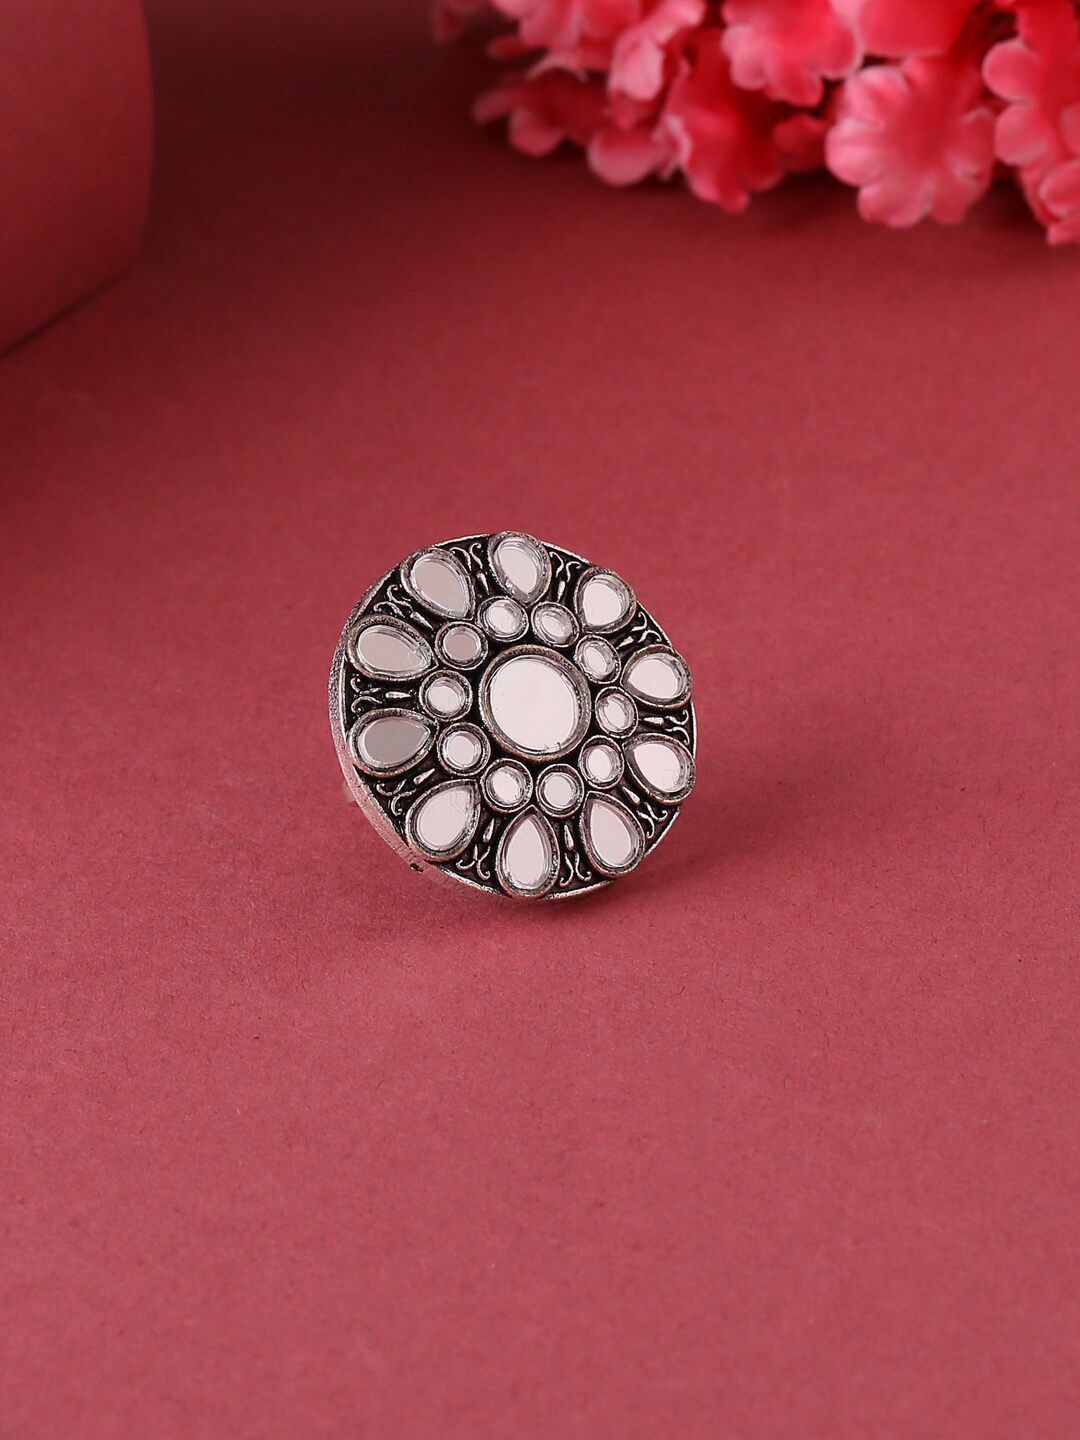 VIRAASI Oxidized Silver-Toned Mirror-Studded Adjustable Finger Ring Price in India